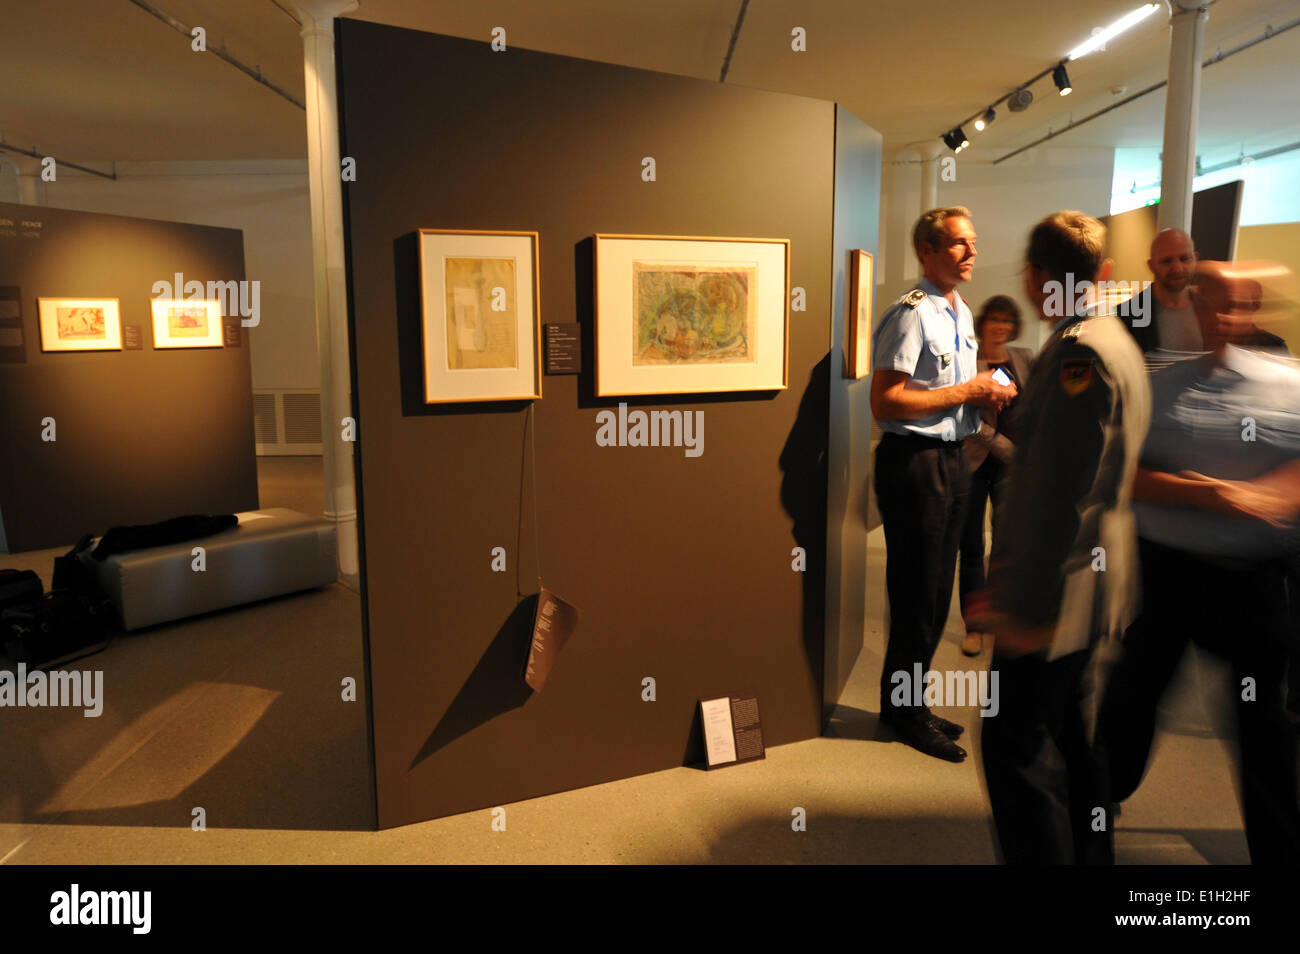 Dresden, Germany. 04th June, 2014. Visitors of the Bundeswehr Military History Museum look at exhibits of the special exhibition 'Krieg und Wahnsinn. Kunst aus der zivilen Psychiatrie zu Militär und I. Weltkrieg - Werke der Sammlung Prinzhorn' (lit. War and madness. Art from civil psychiatries on military and World War One - Works of the Prinzhorn collection' in Dresden, Germany, 04 June 2014. The special exhibtion which looks on the German Empire from an unusual point of view will be open until 07 September 2014. Photo: MATTHIAS HIEKEL/dpa/Alamy Live News Stock Photo